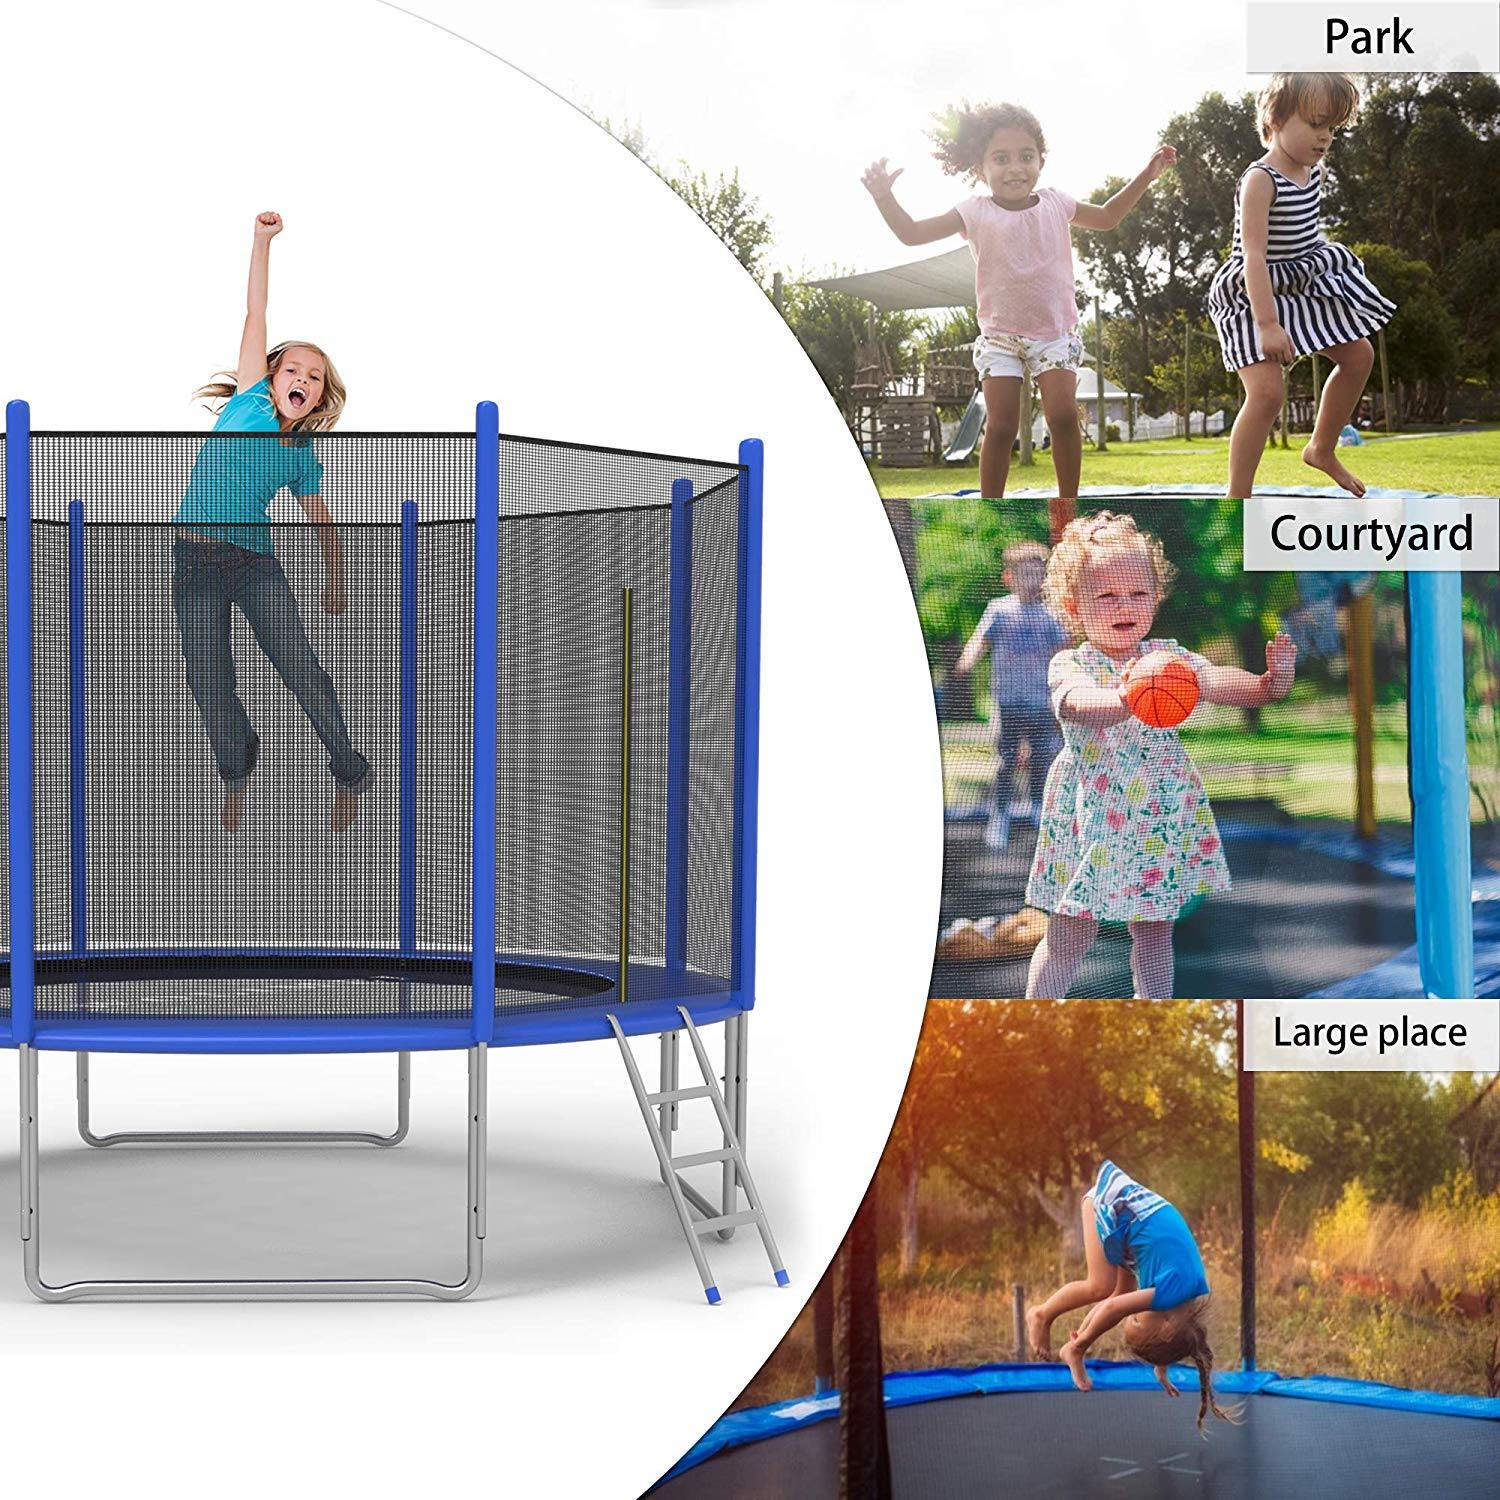 12 FT Trampoline For Kids And Family Outdoor Trampoline With Safety Enclosure Net, Ladder And Spring Cover - Backyard Bounce Jump Have Fun - Bosonshop